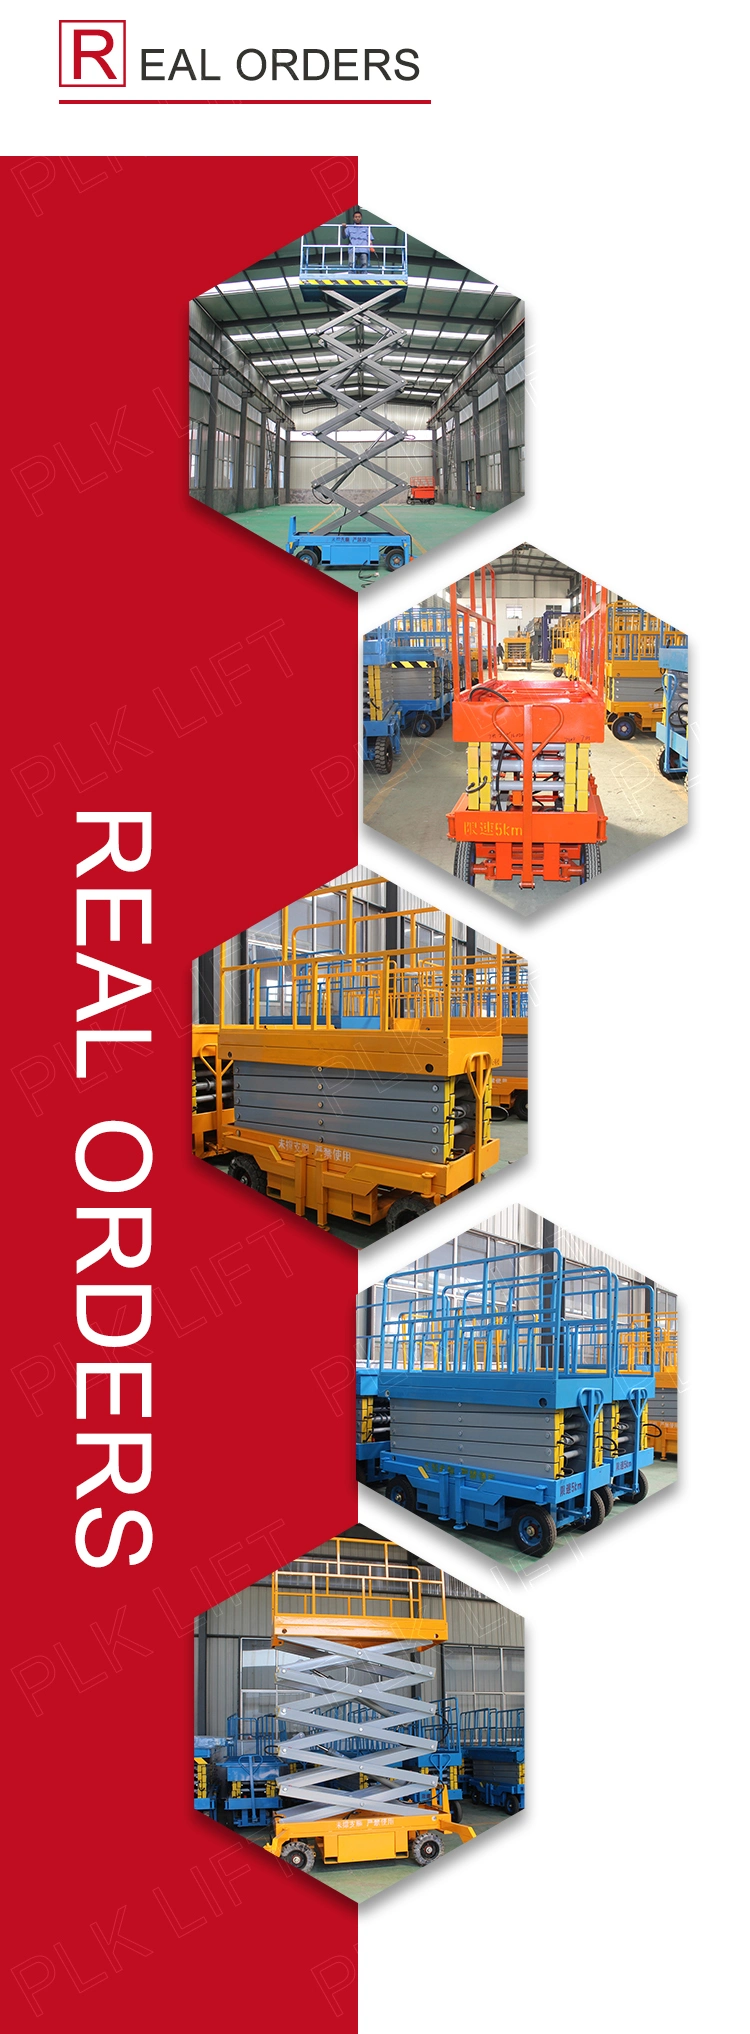 Hydraulic Semi Electric Manually Moving Scissor Lift with Cheap Price